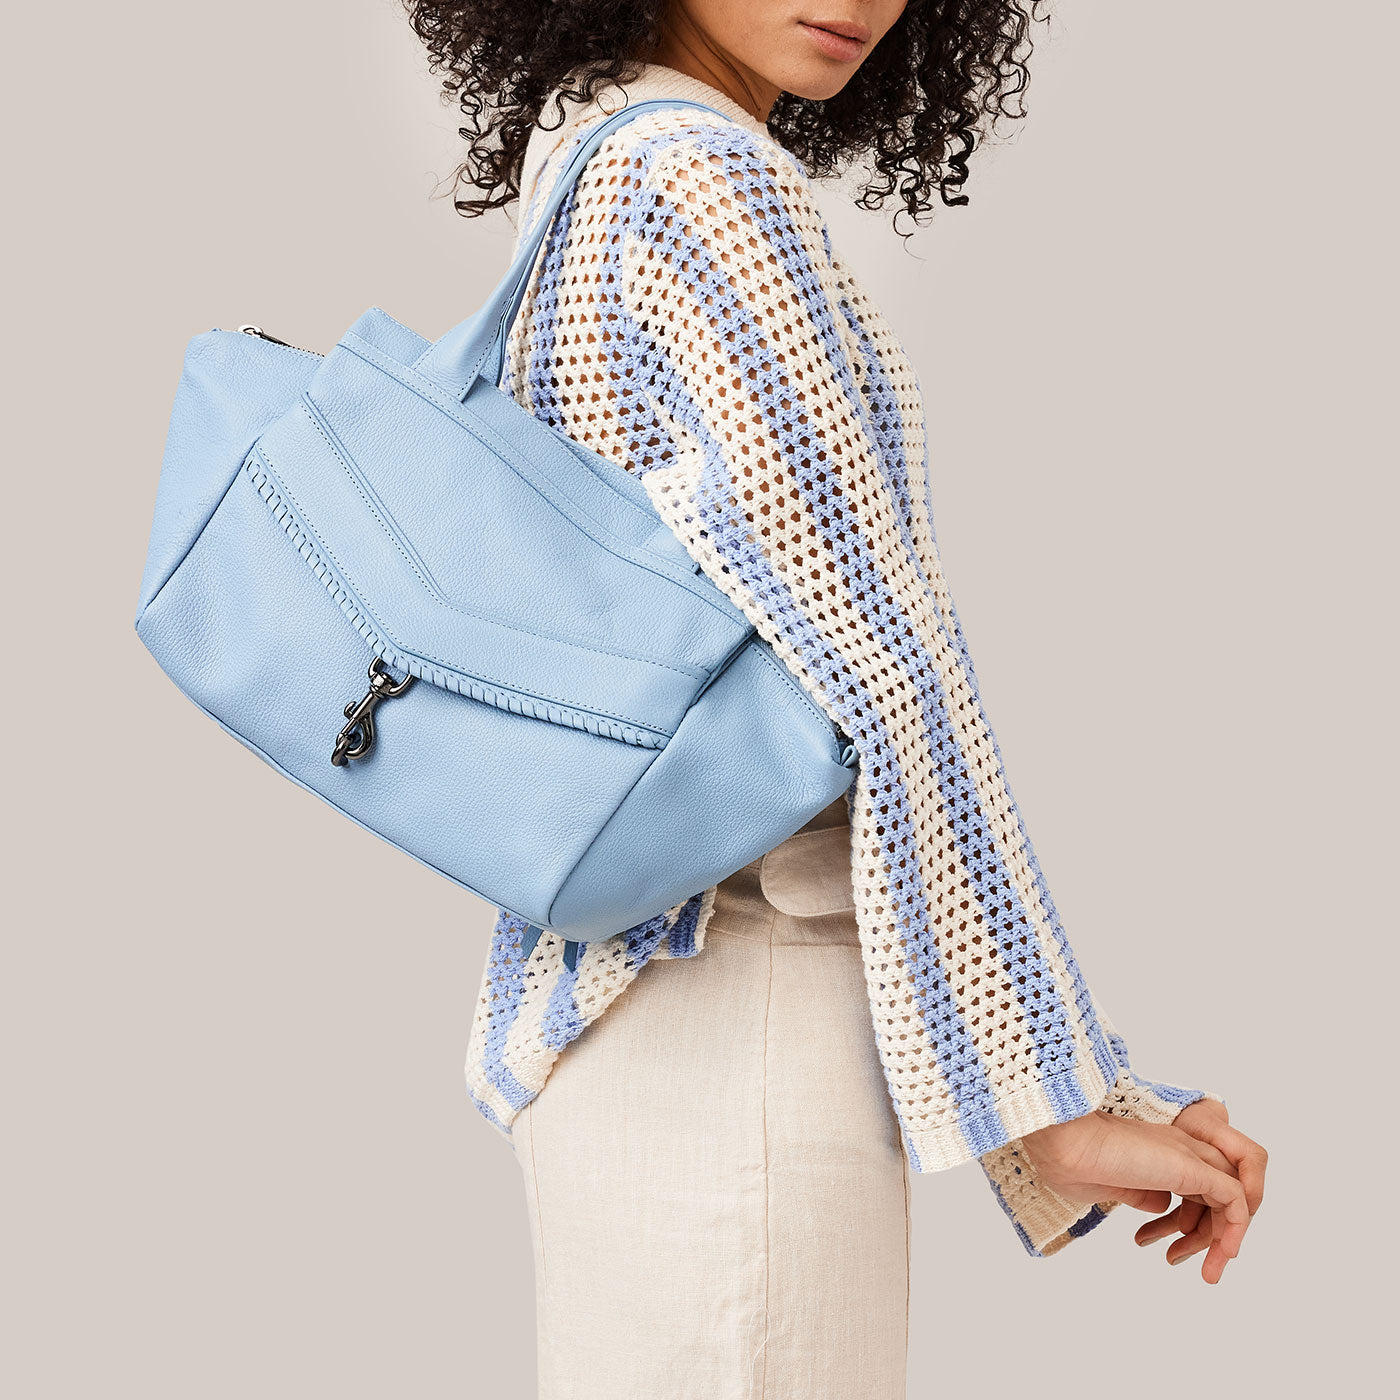 Botkier Blog: What's In Our Bag: Trigger Backpack | Botkier New York